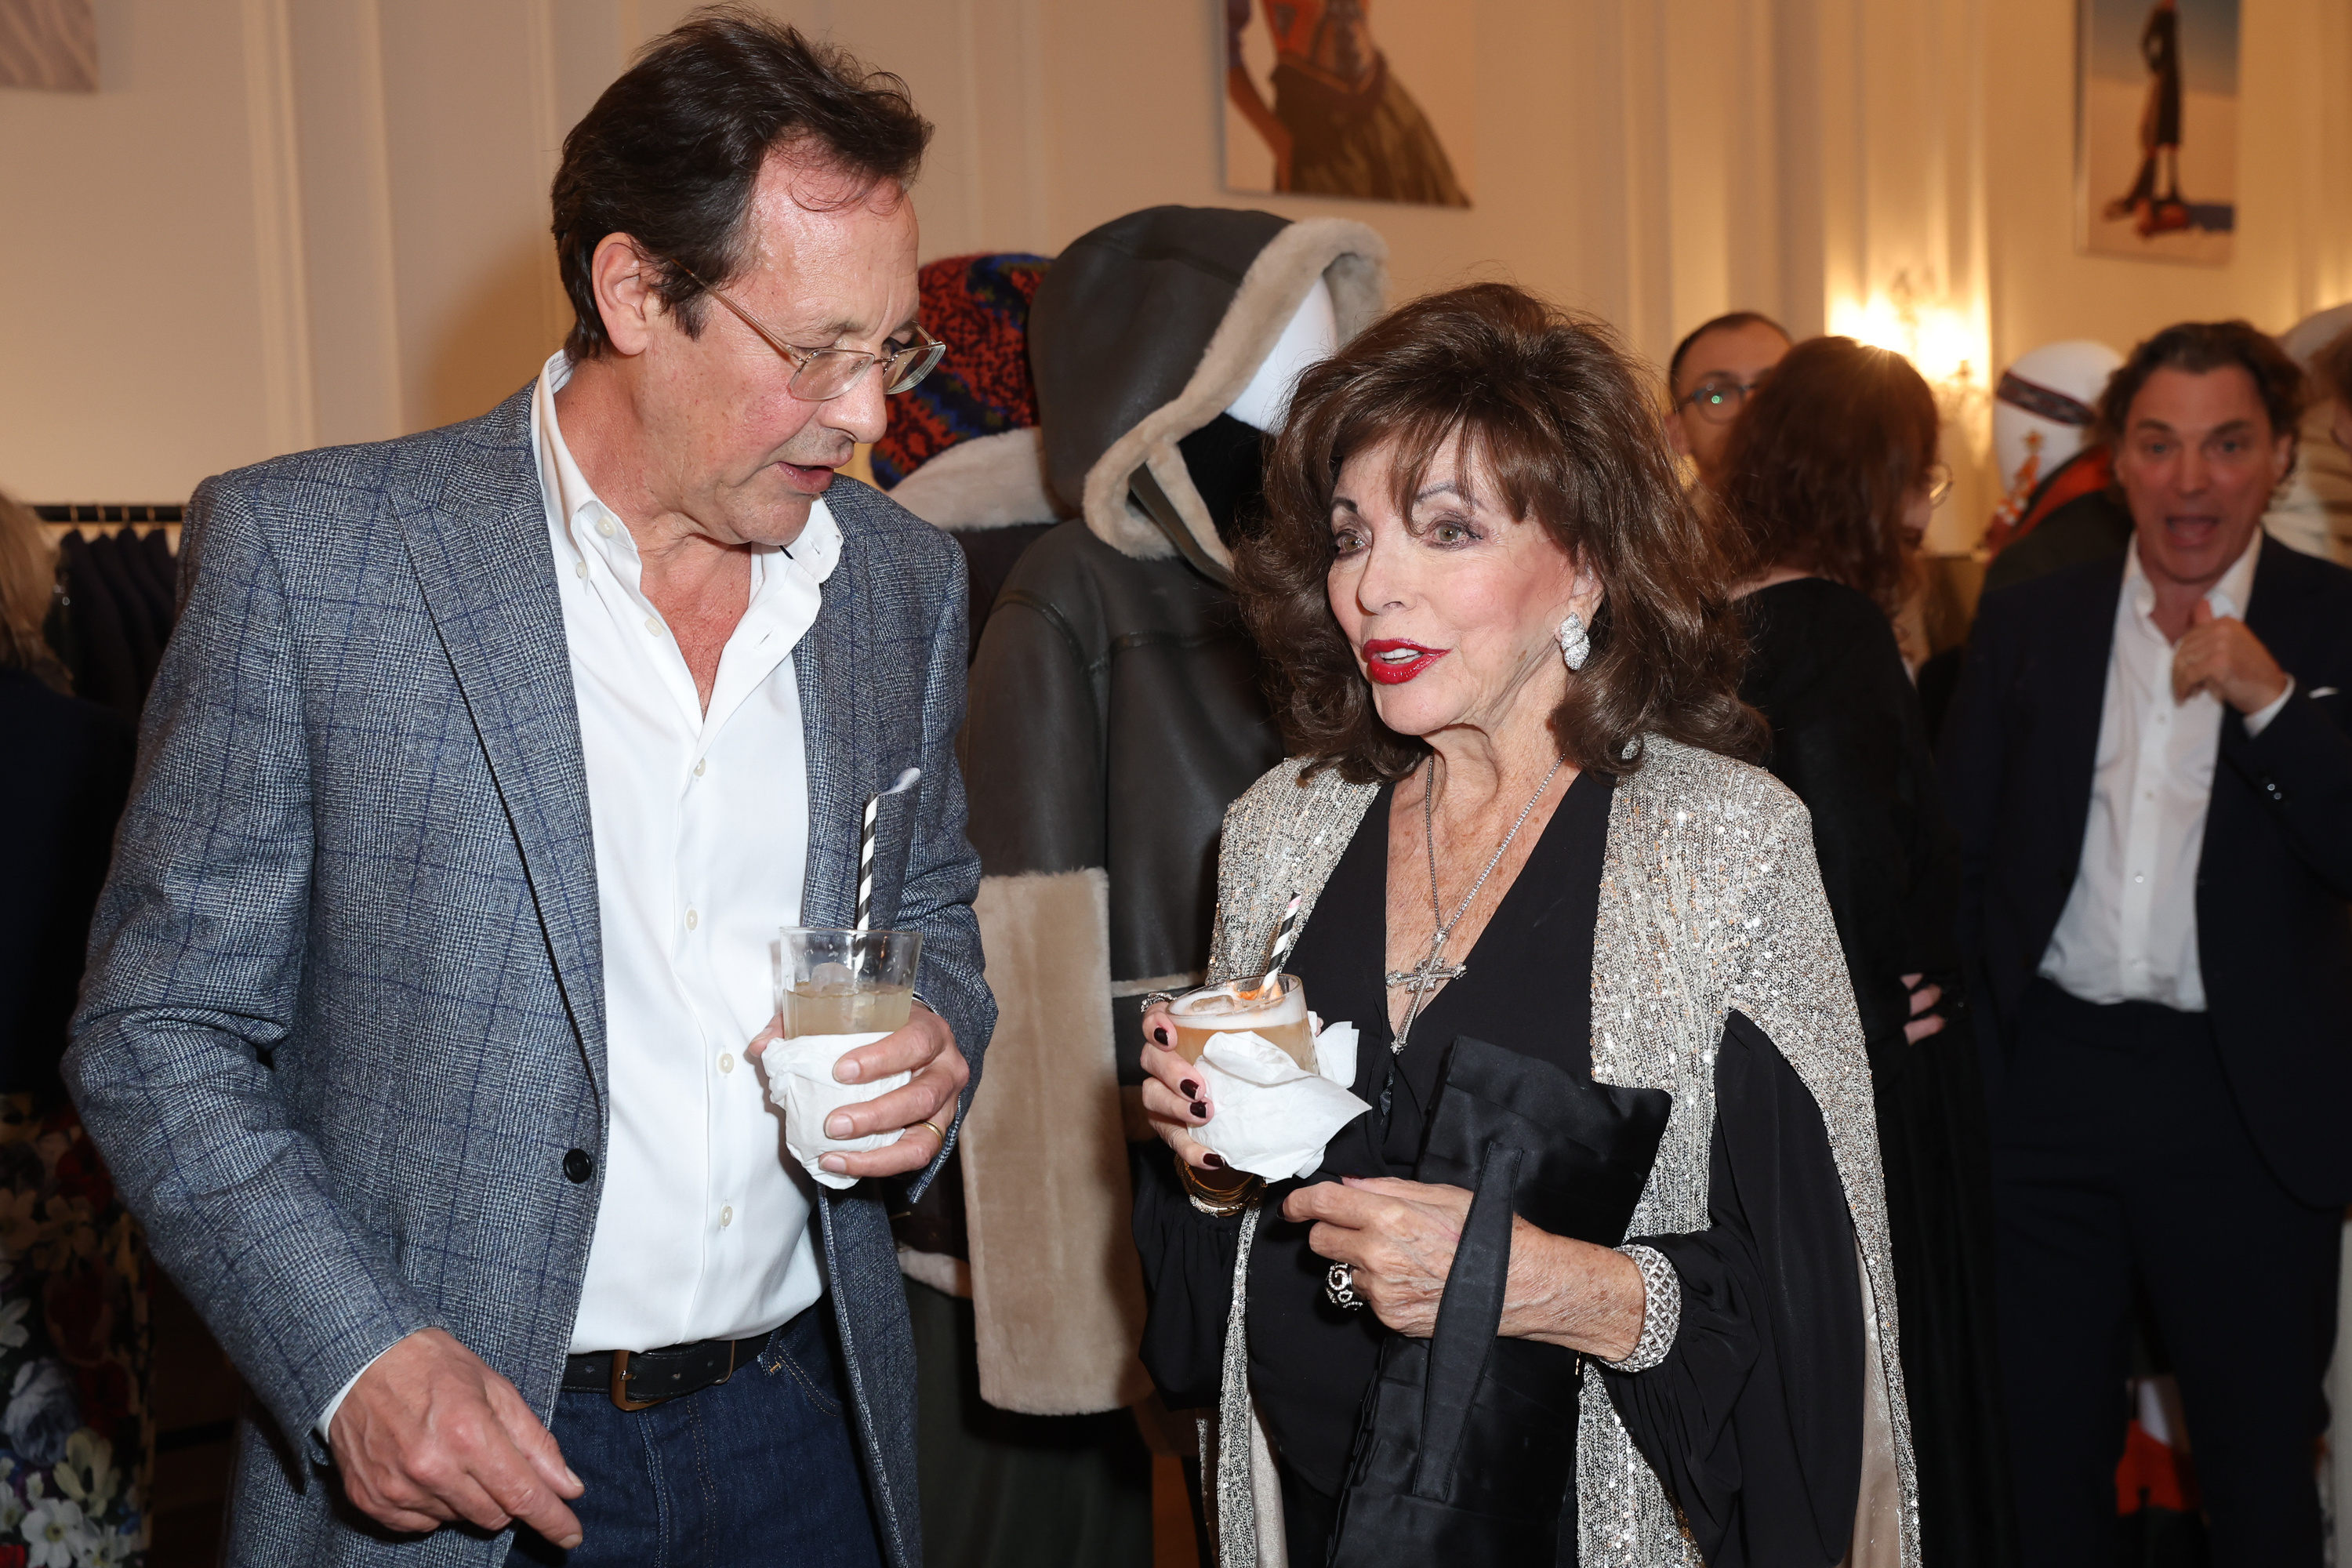 Percy Gibson and Dame Joan Collins at the Glenda Bailey x Peruvian Connection collaboration launch at The Polish Hearth Club on October 20, 2022 in London, England | Getty Images